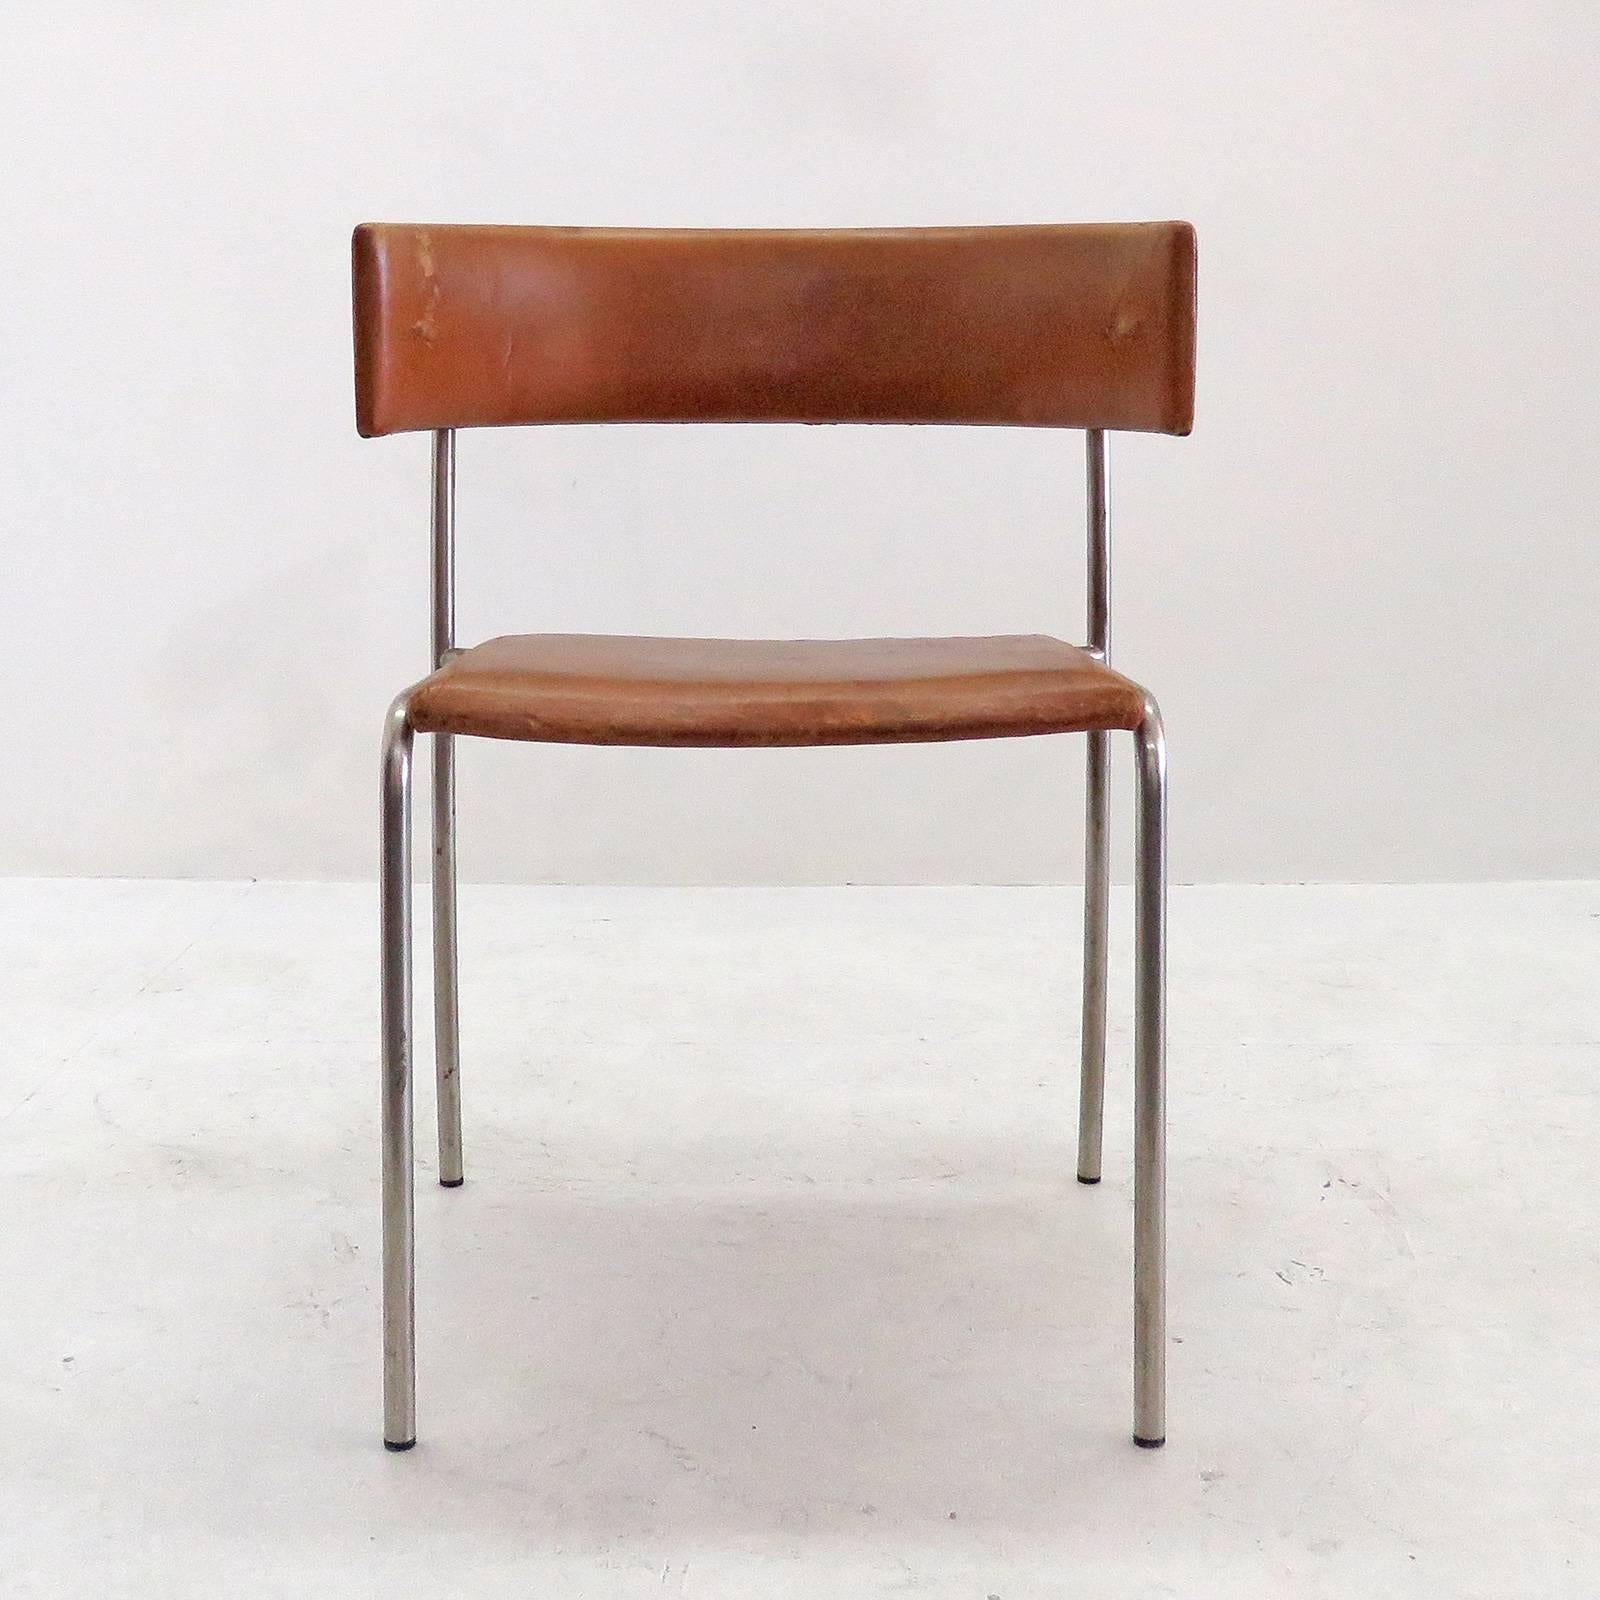 Rare pair of sculptural side chairs by Erik Karlström with patinated leather seat and backrest on Minimalist chrome frames, designed for the Civic Hall Orebro, Sweden, which was built between 1957-1965 with the interior designed by Erik Karlström